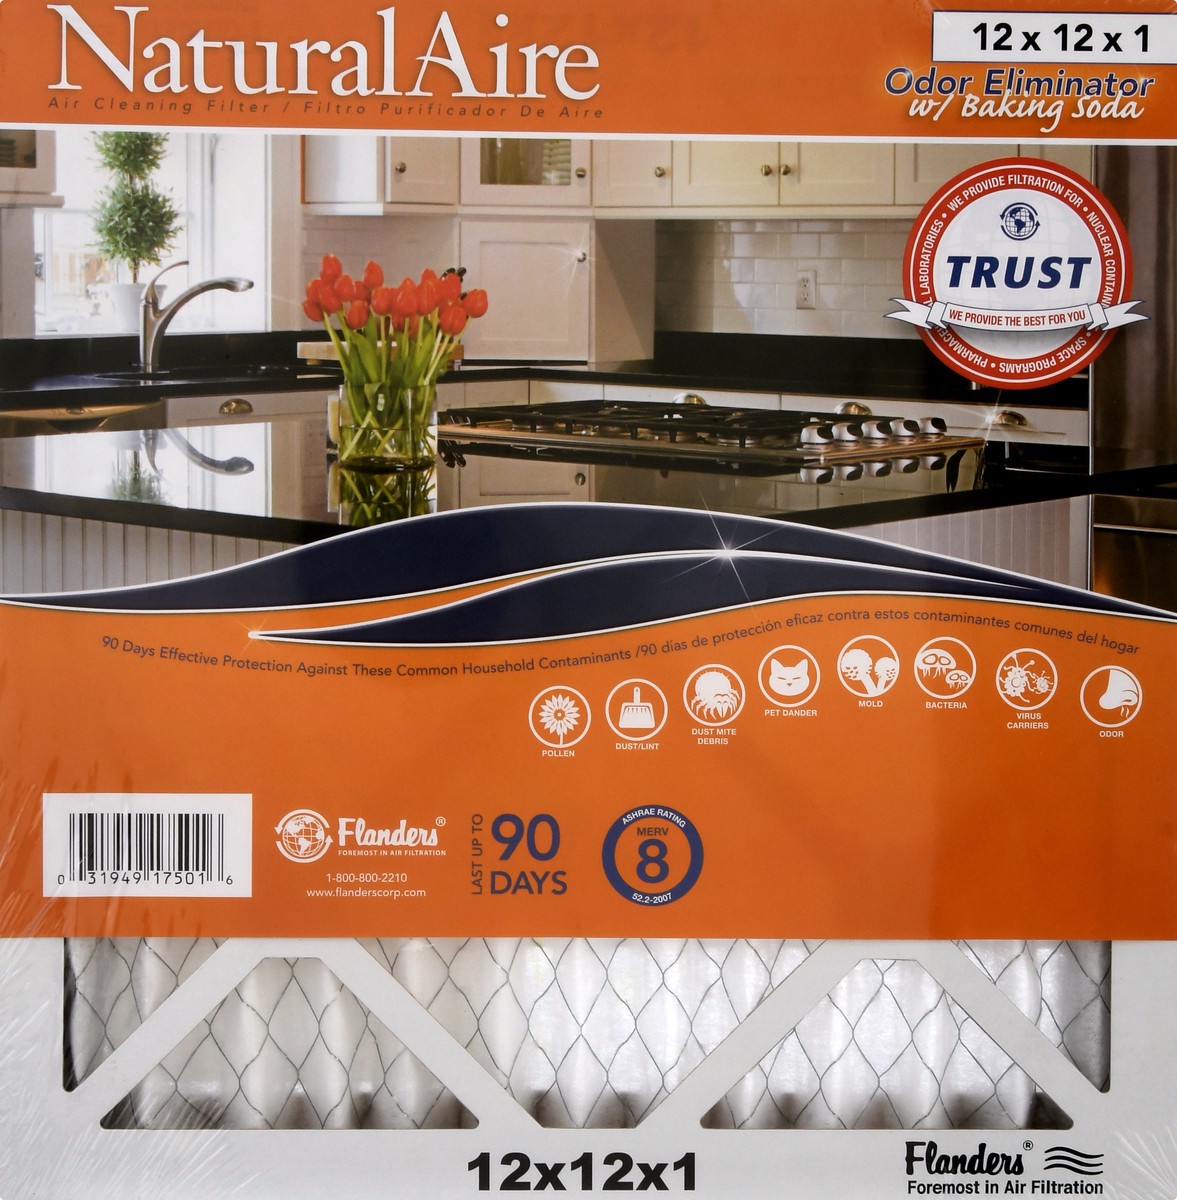 slide 8 of 11, NaturalAire 12" x 12" x 1" Air Cleaning Filter Odor Eliminator With Baking Soda, LG